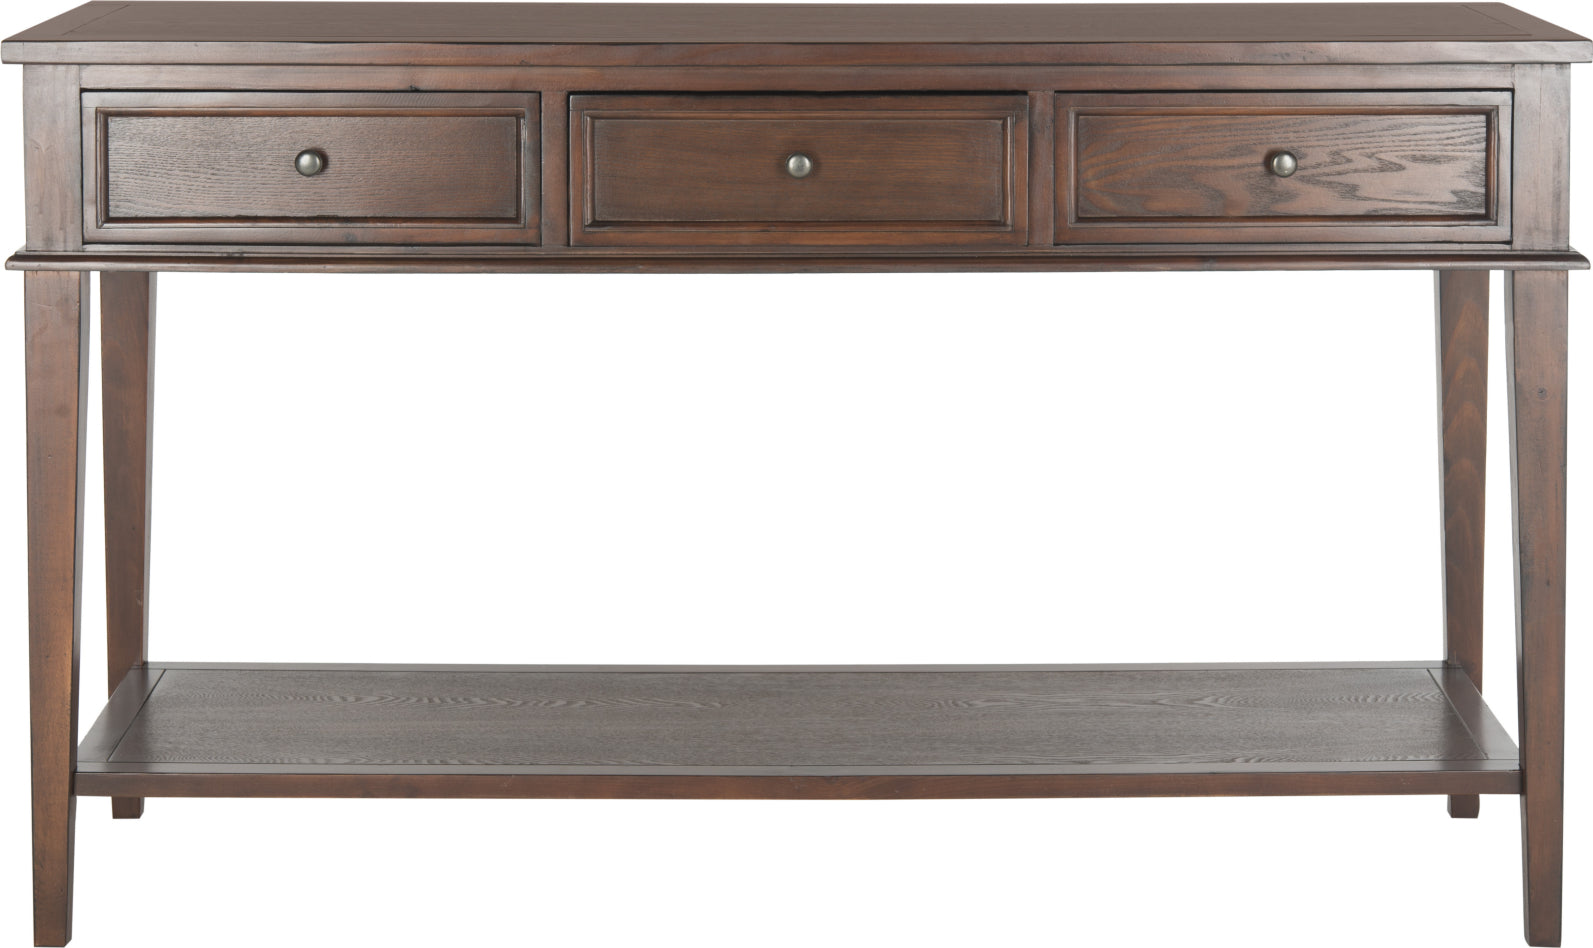 Safavieh Manelin Console With Storage Drawers Sepia Furniture main image